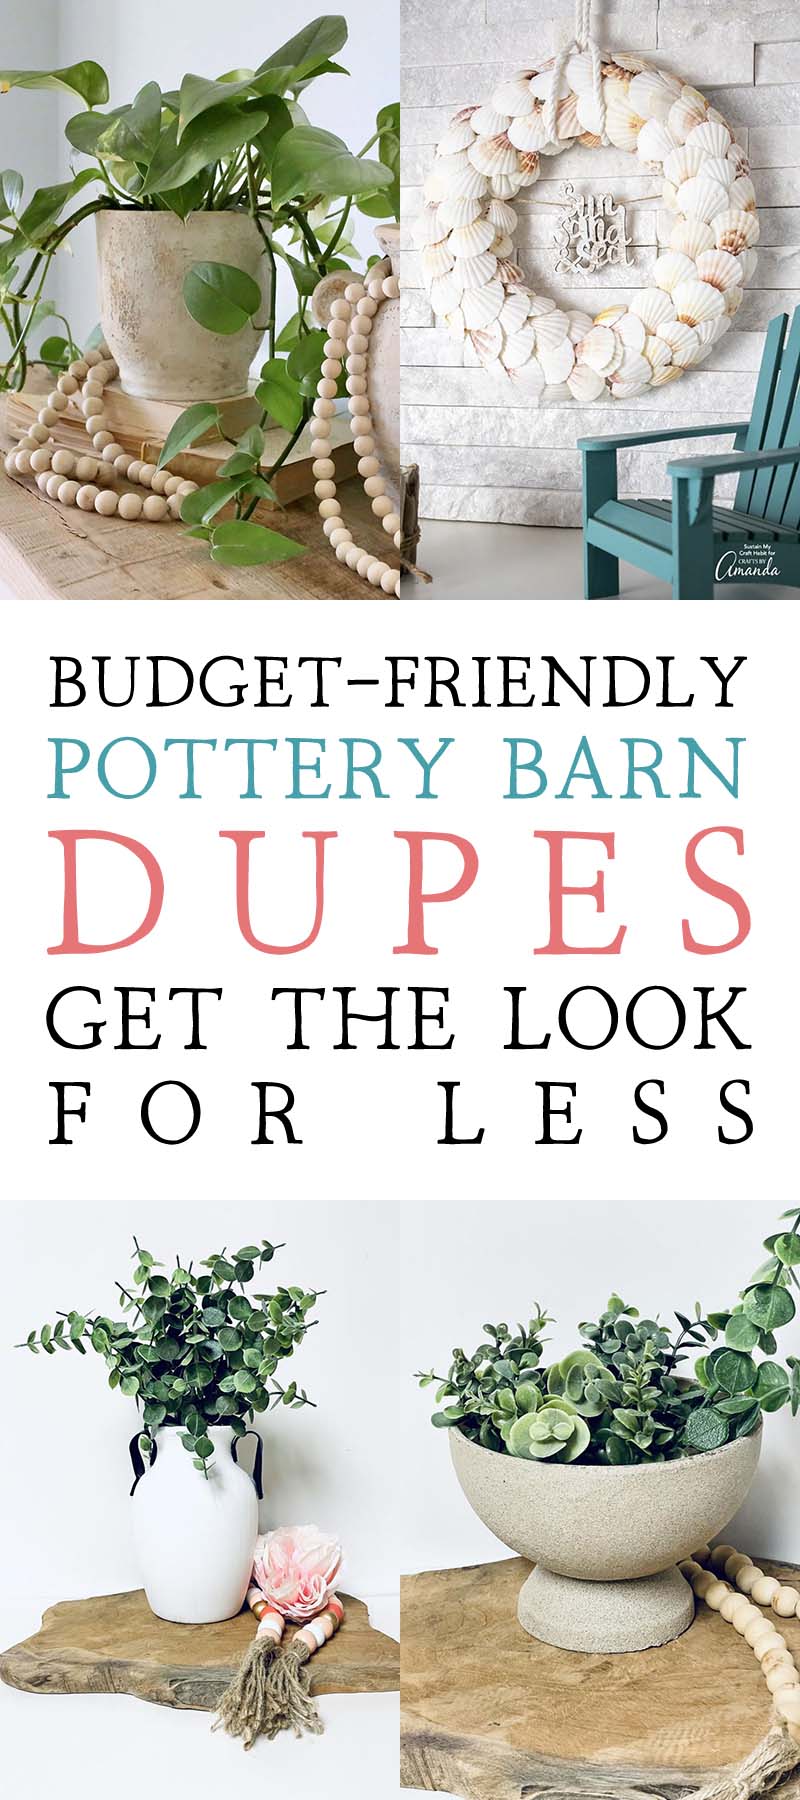 We've embarked on a treasure hunt for the most delightful Pottery Barn dupes that won't break the bank, allowing you to achieve that coveted aesthetic without sacrificing your hard-earned savings